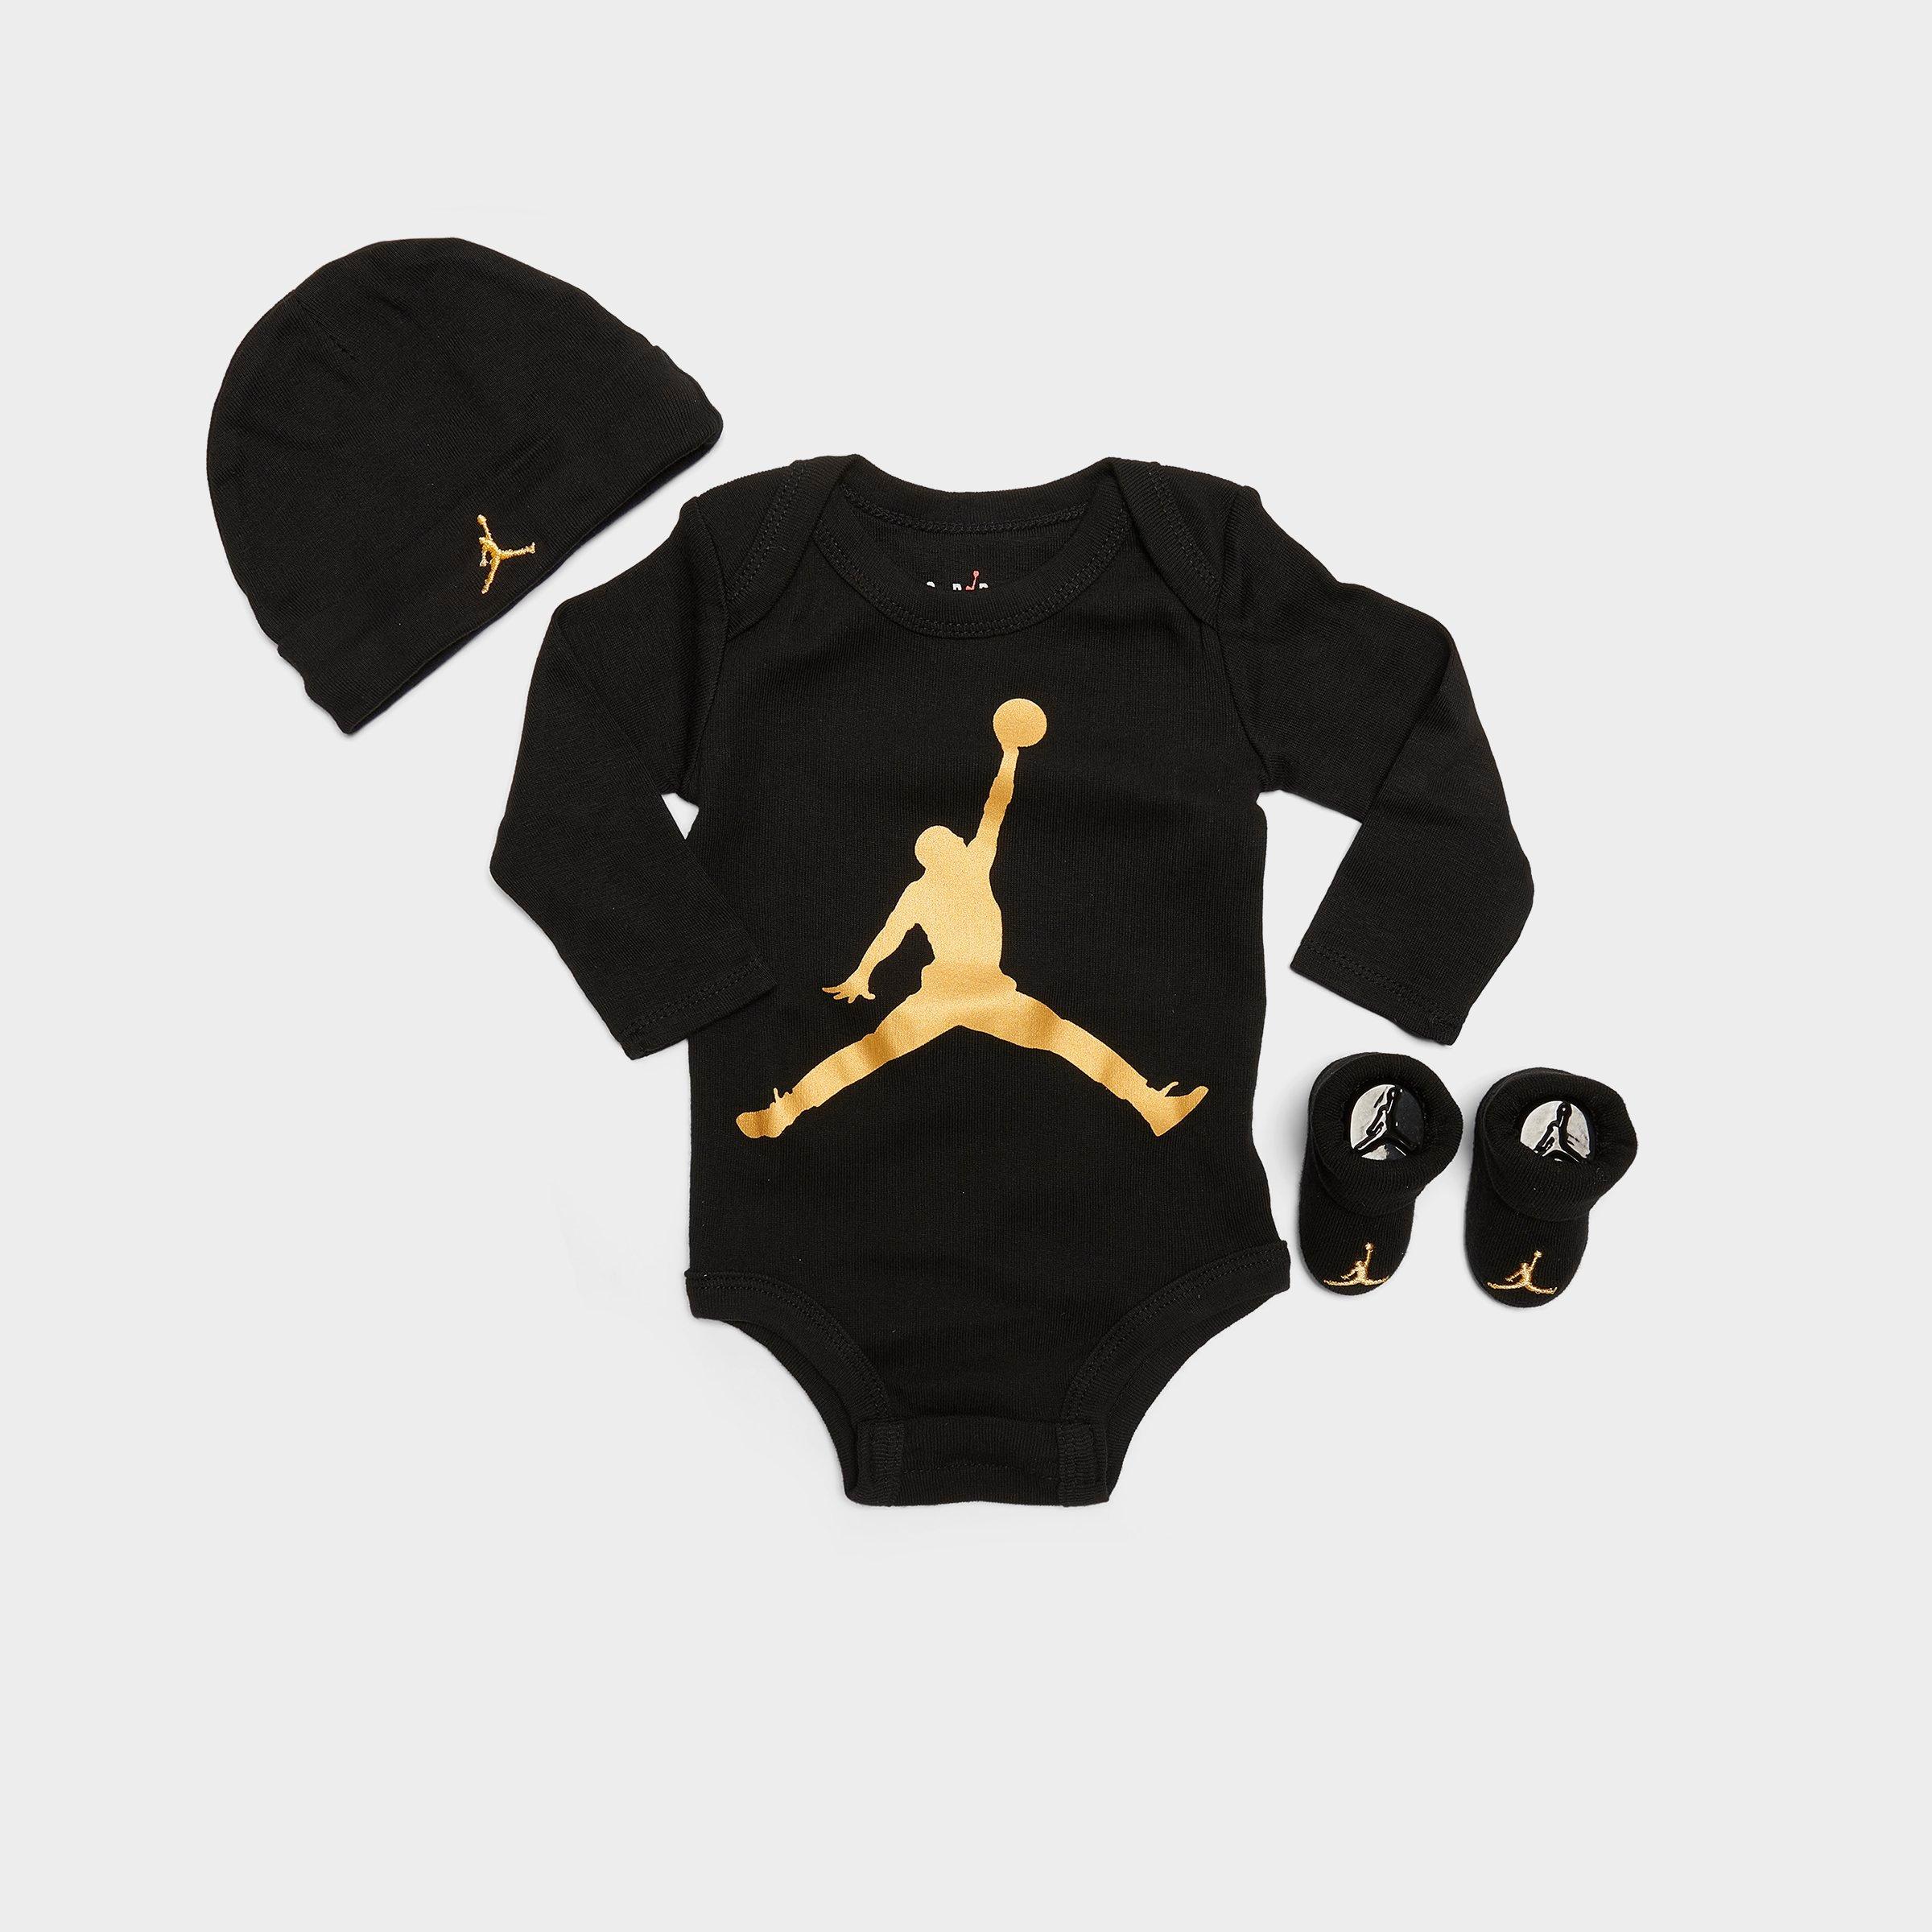 nike outfit baby boy